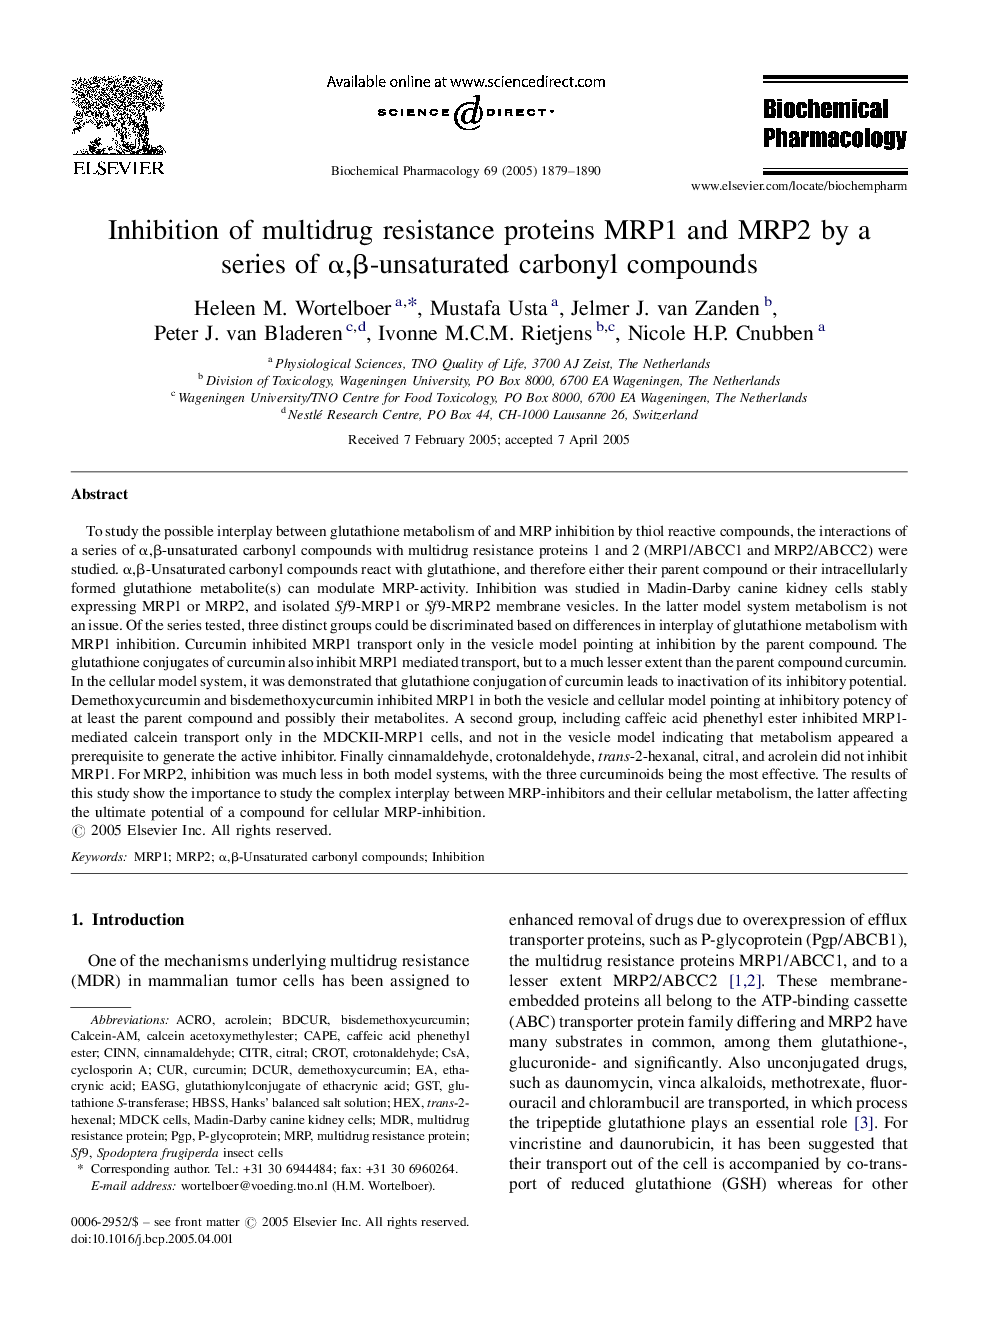 Inhibition of multidrug resistance proteins MRP1 and MRP2 by a series of Î±,Î²-unsaturated carbonyl compounds